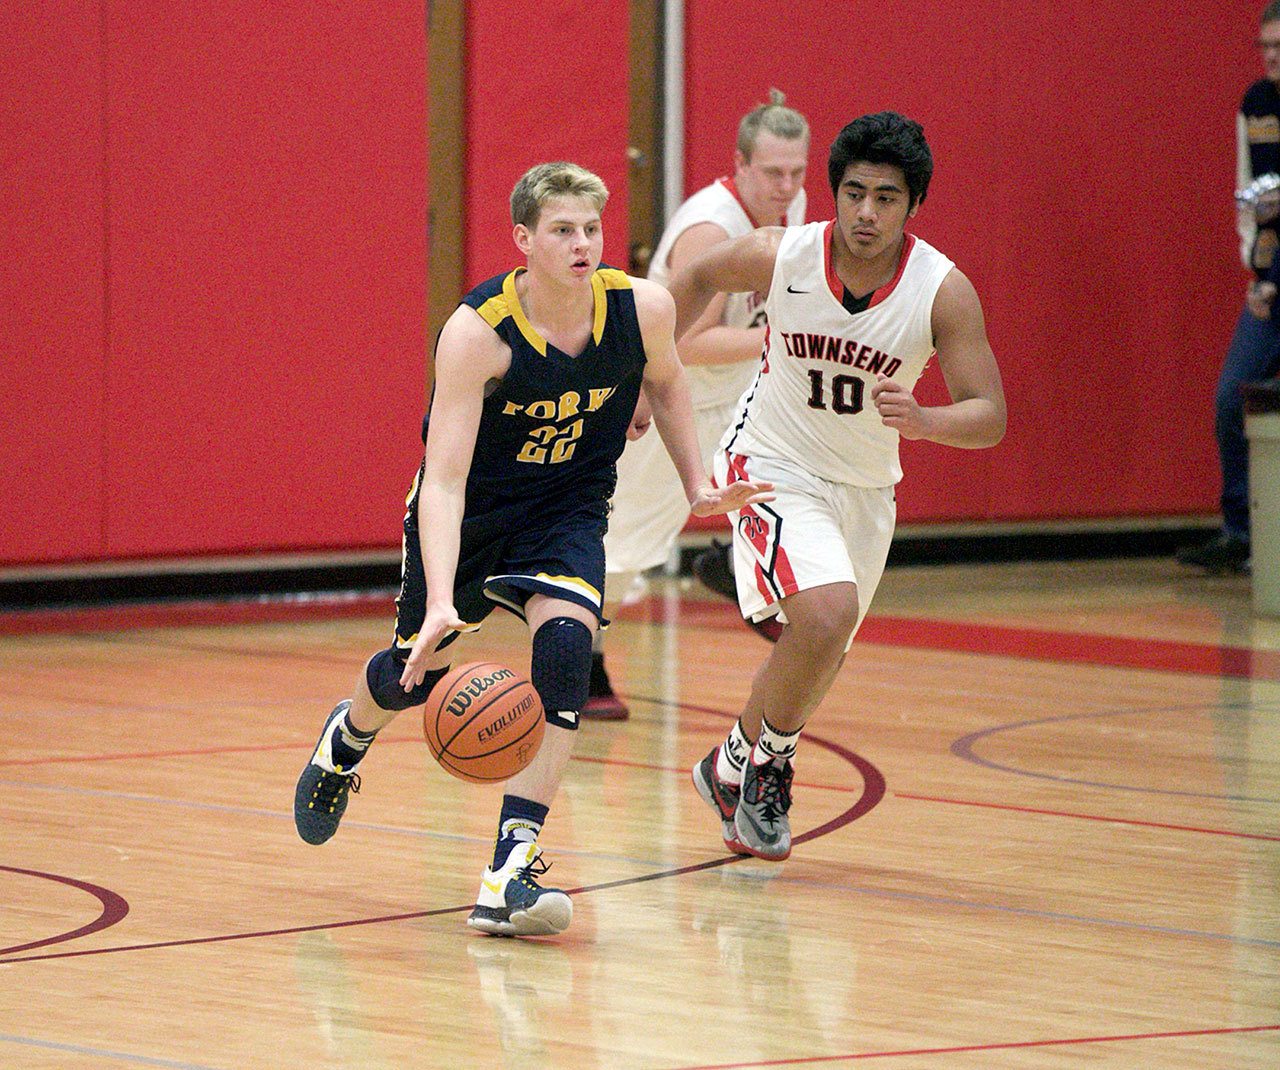 Steve Mullensky/for Peninsula Daily News Forks’ Parker Browning, 22, races Redhawk Detrius Kelsall down court during a Thursday night game in Port Townsend.